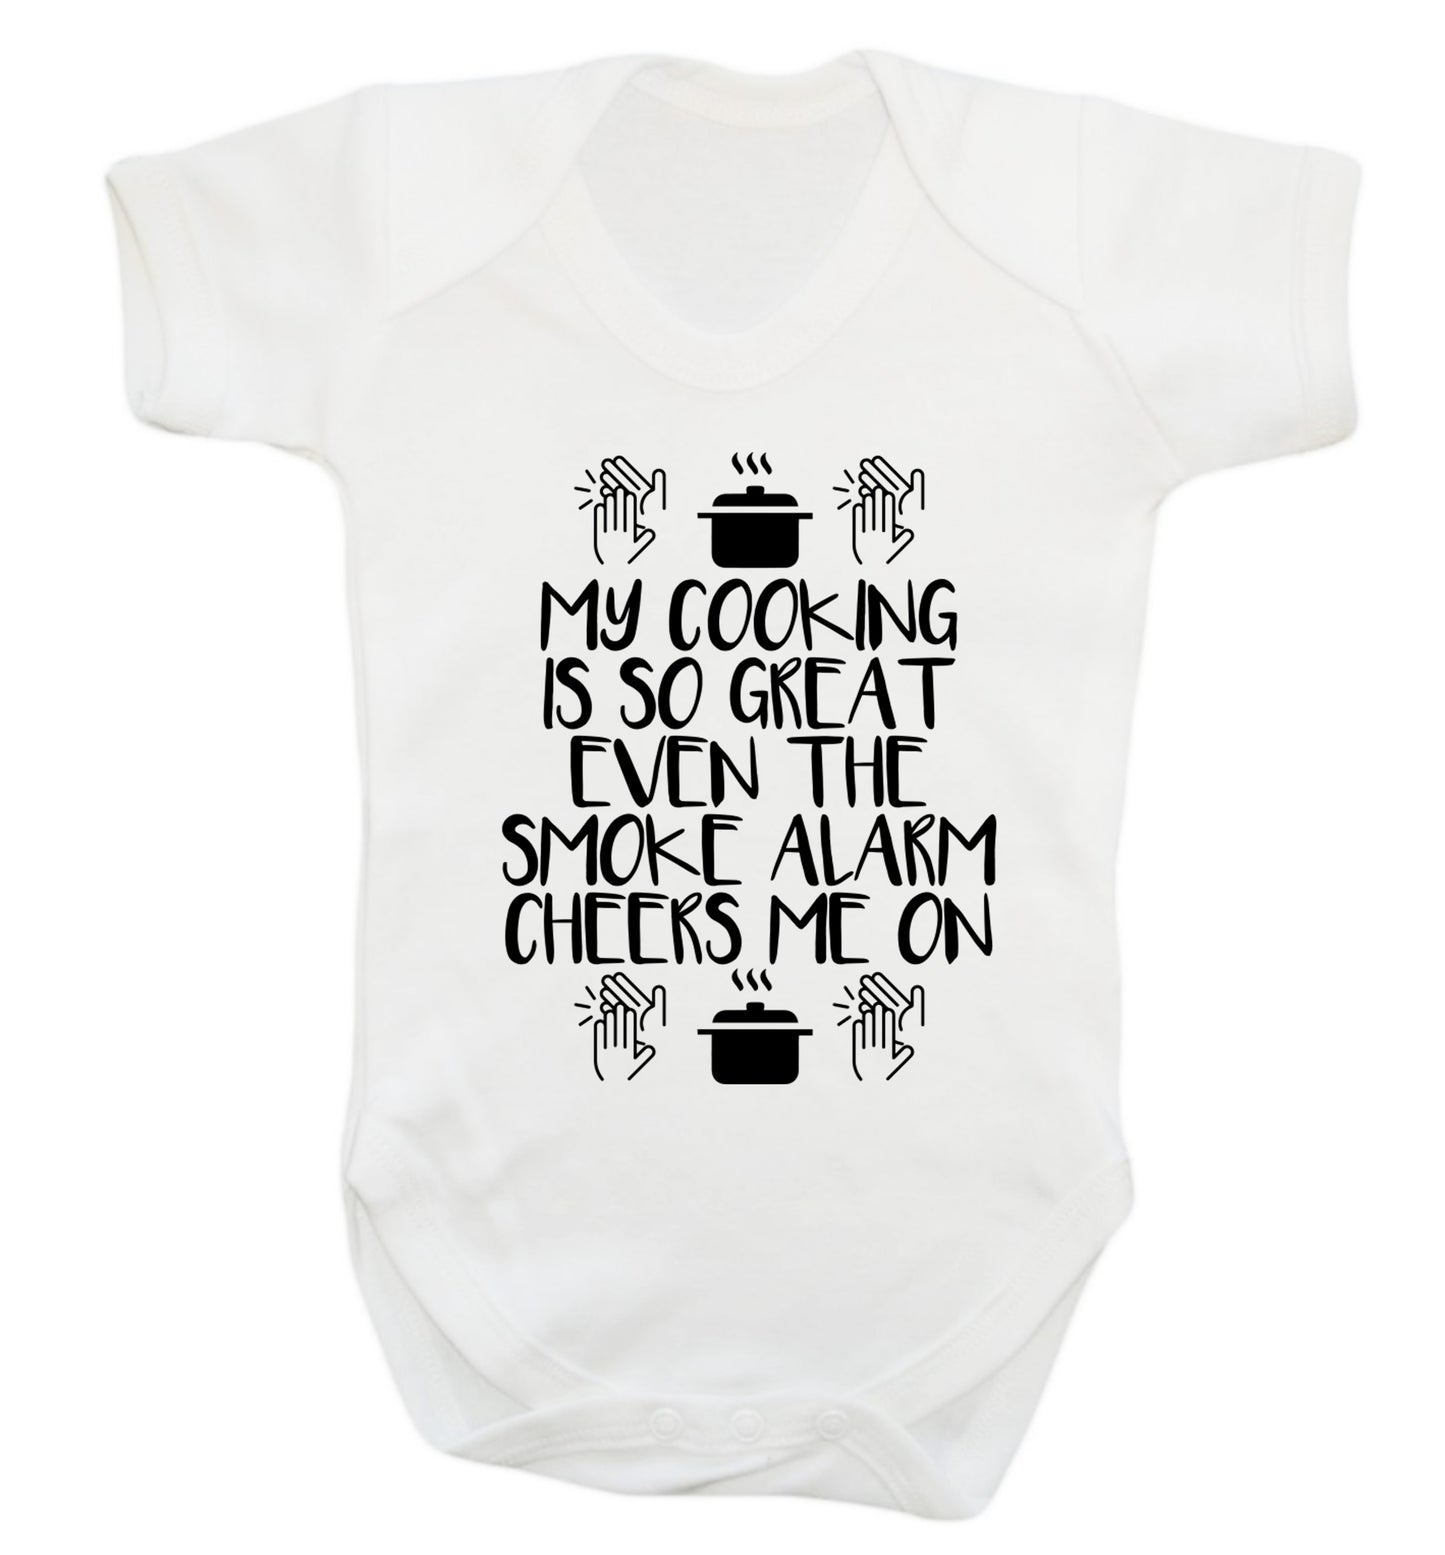 My cooking is so great even the smoke alarm cheers me on! Baby Vest white 18-24 months